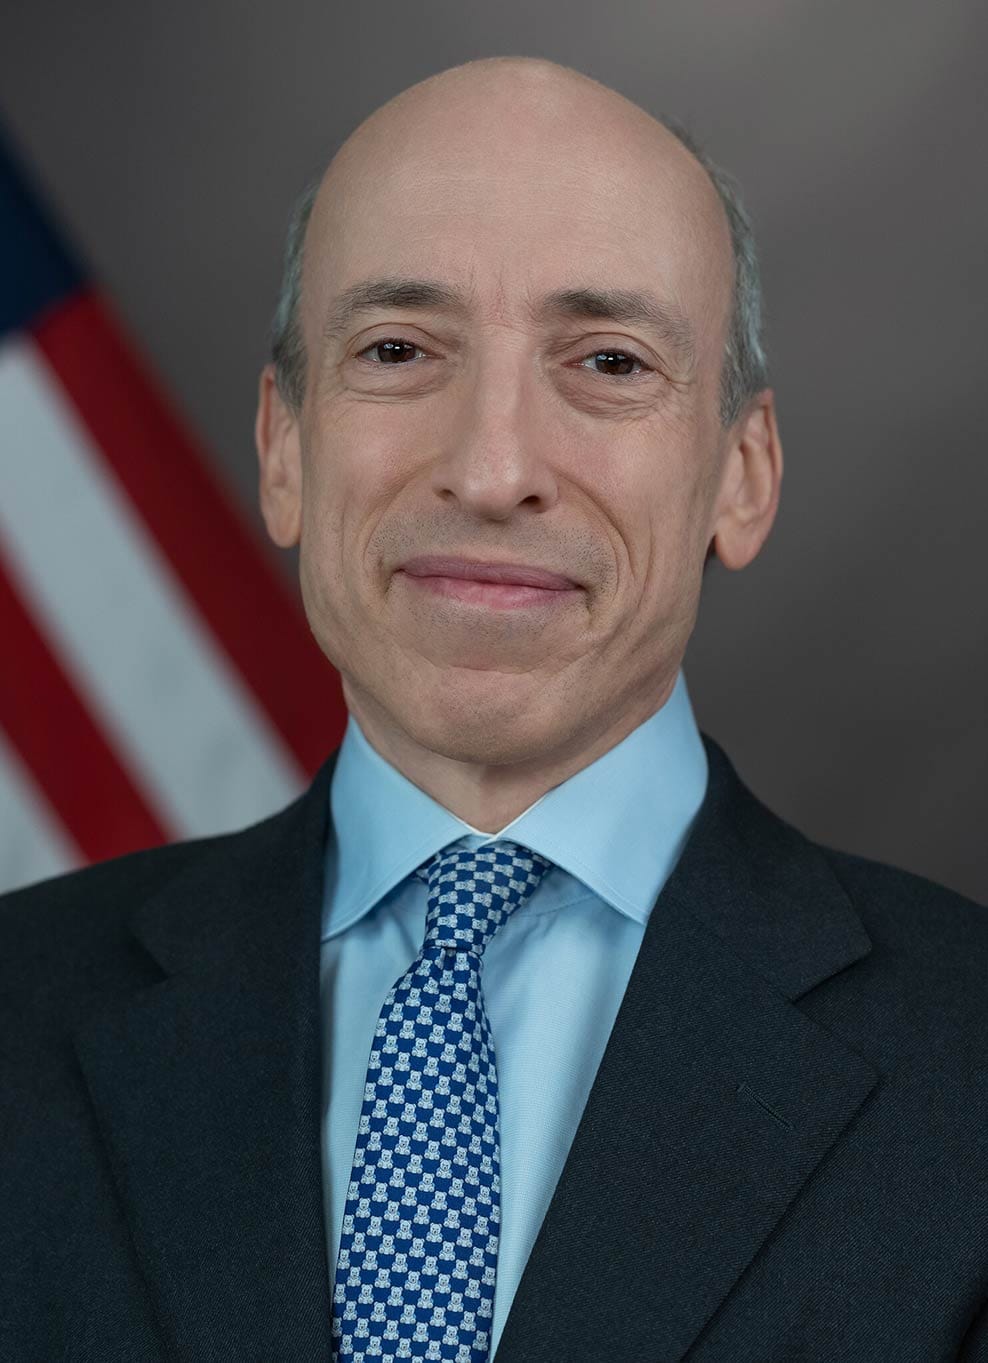 SEC Chair Gary Gensler Takes Another Swipe at the Crypto Sector, Says Digital Asset Firms Avoid Disclosure Laws